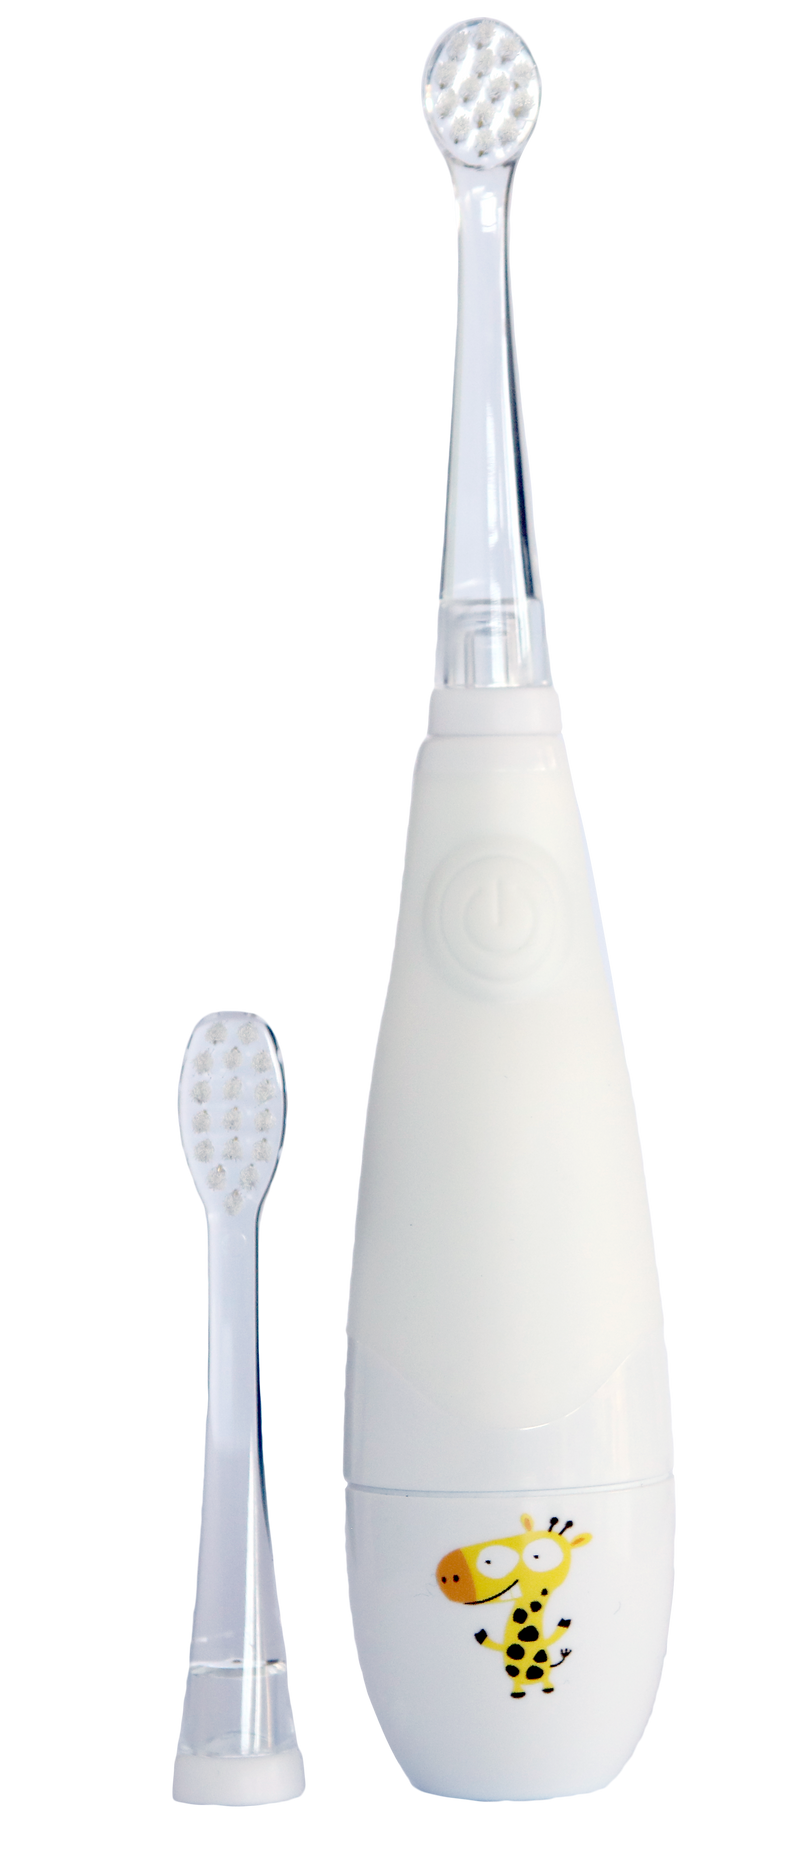 Tickle Tooth Sonic Toothbrush